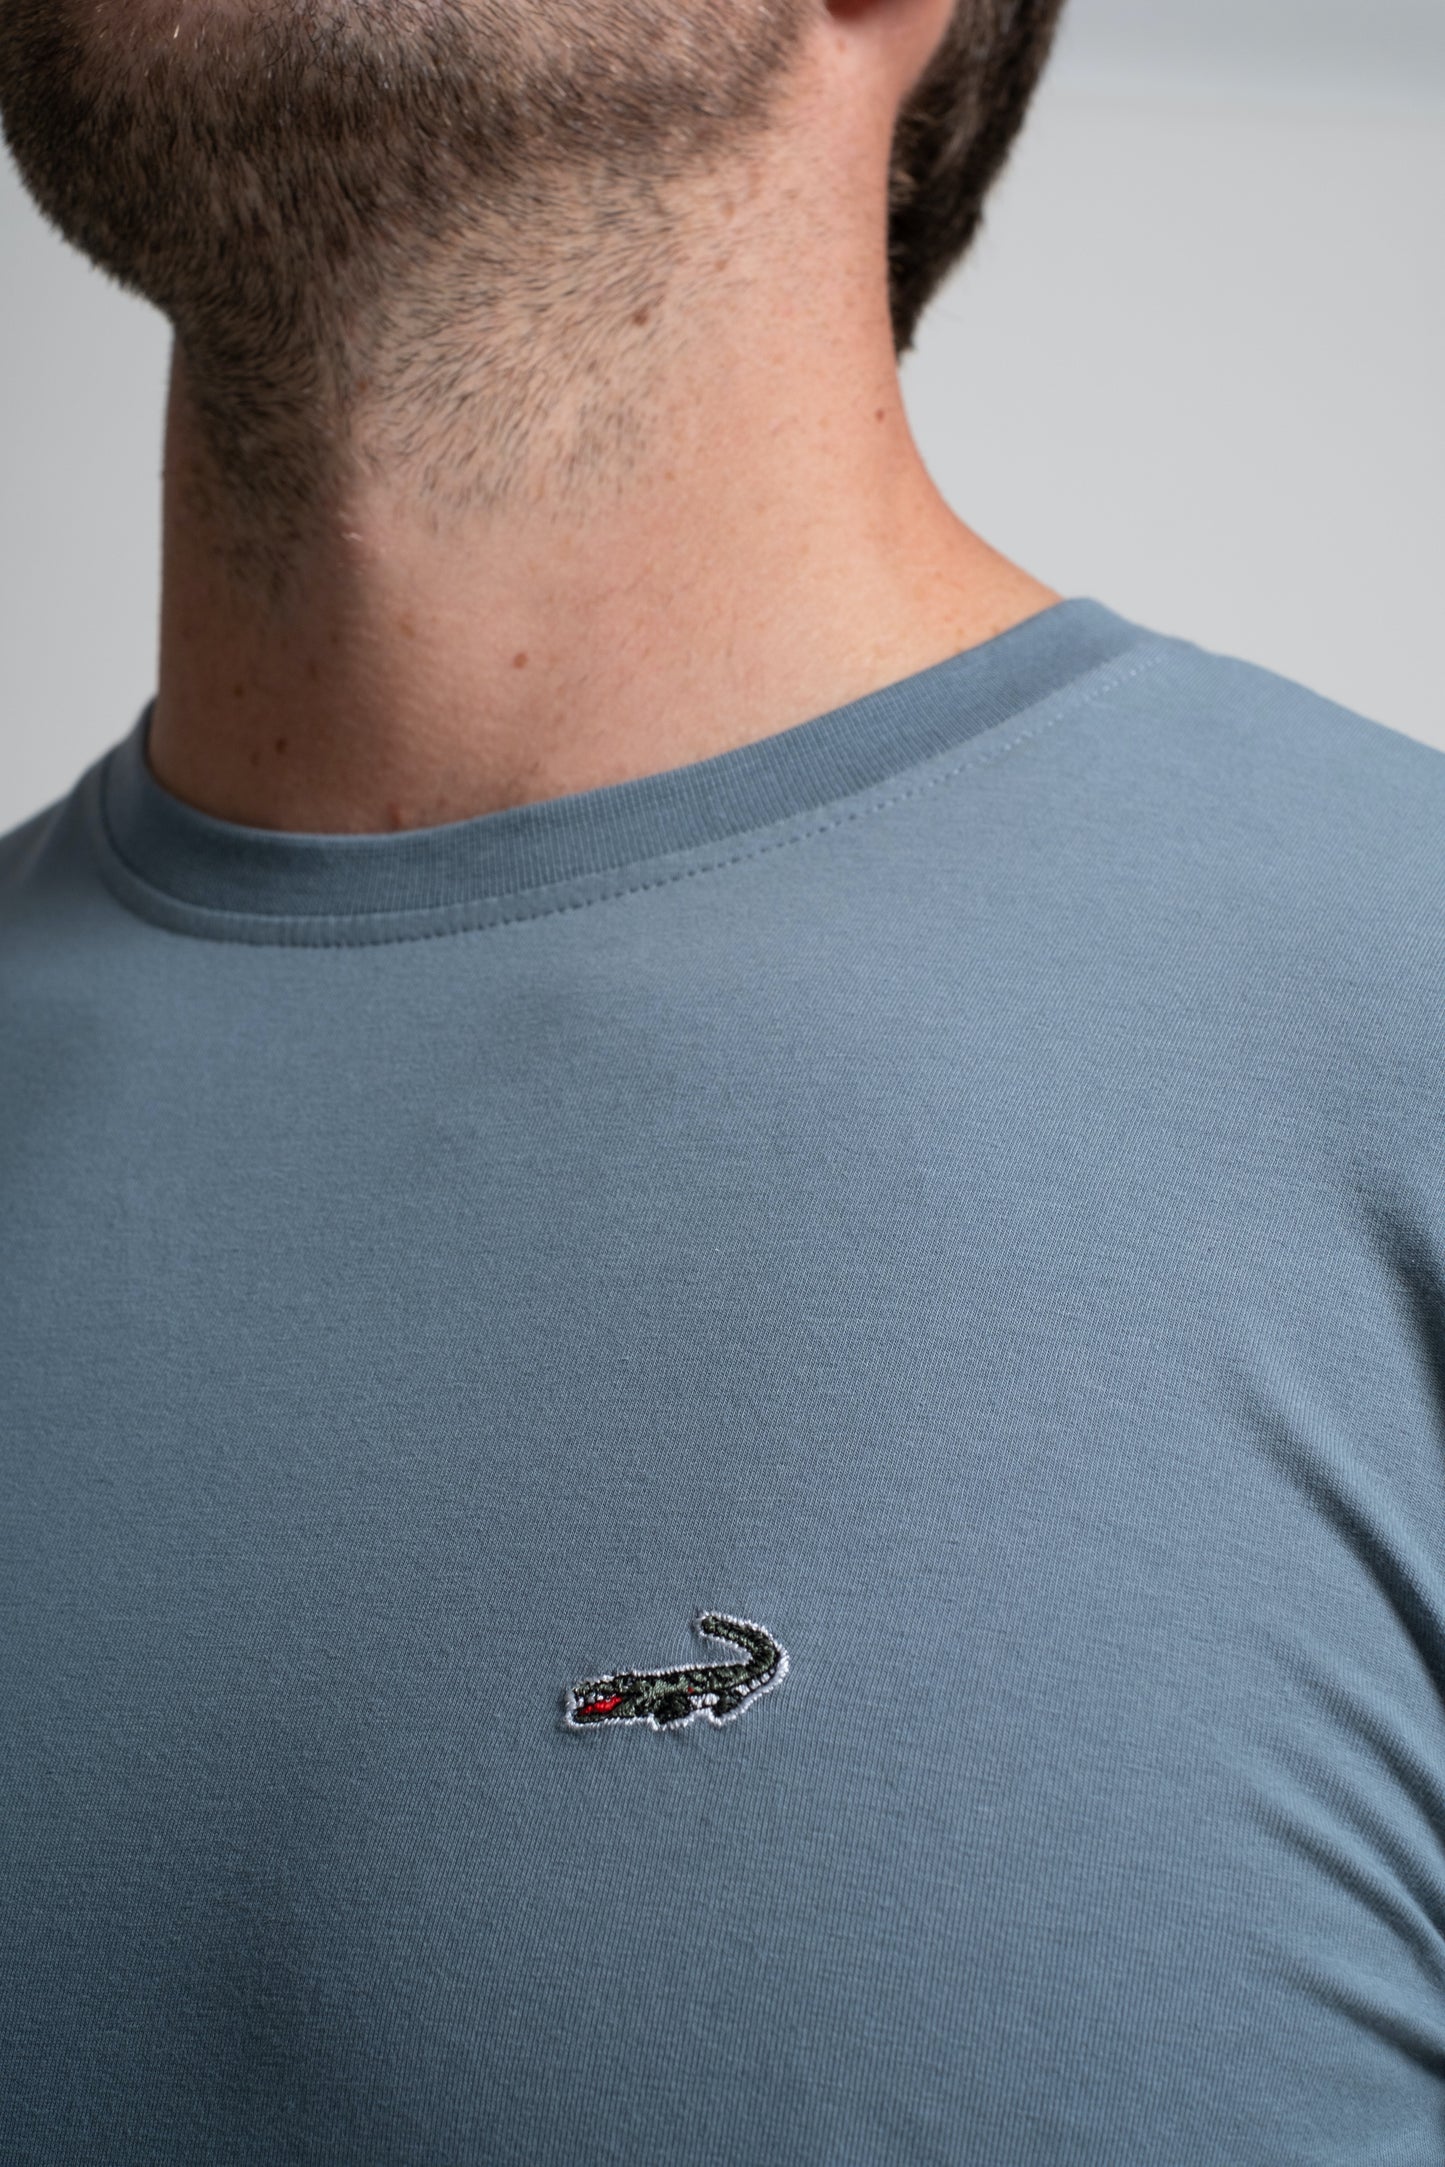 Action Fit Short sleeves-CasualCrew Neck - Blue Heaven